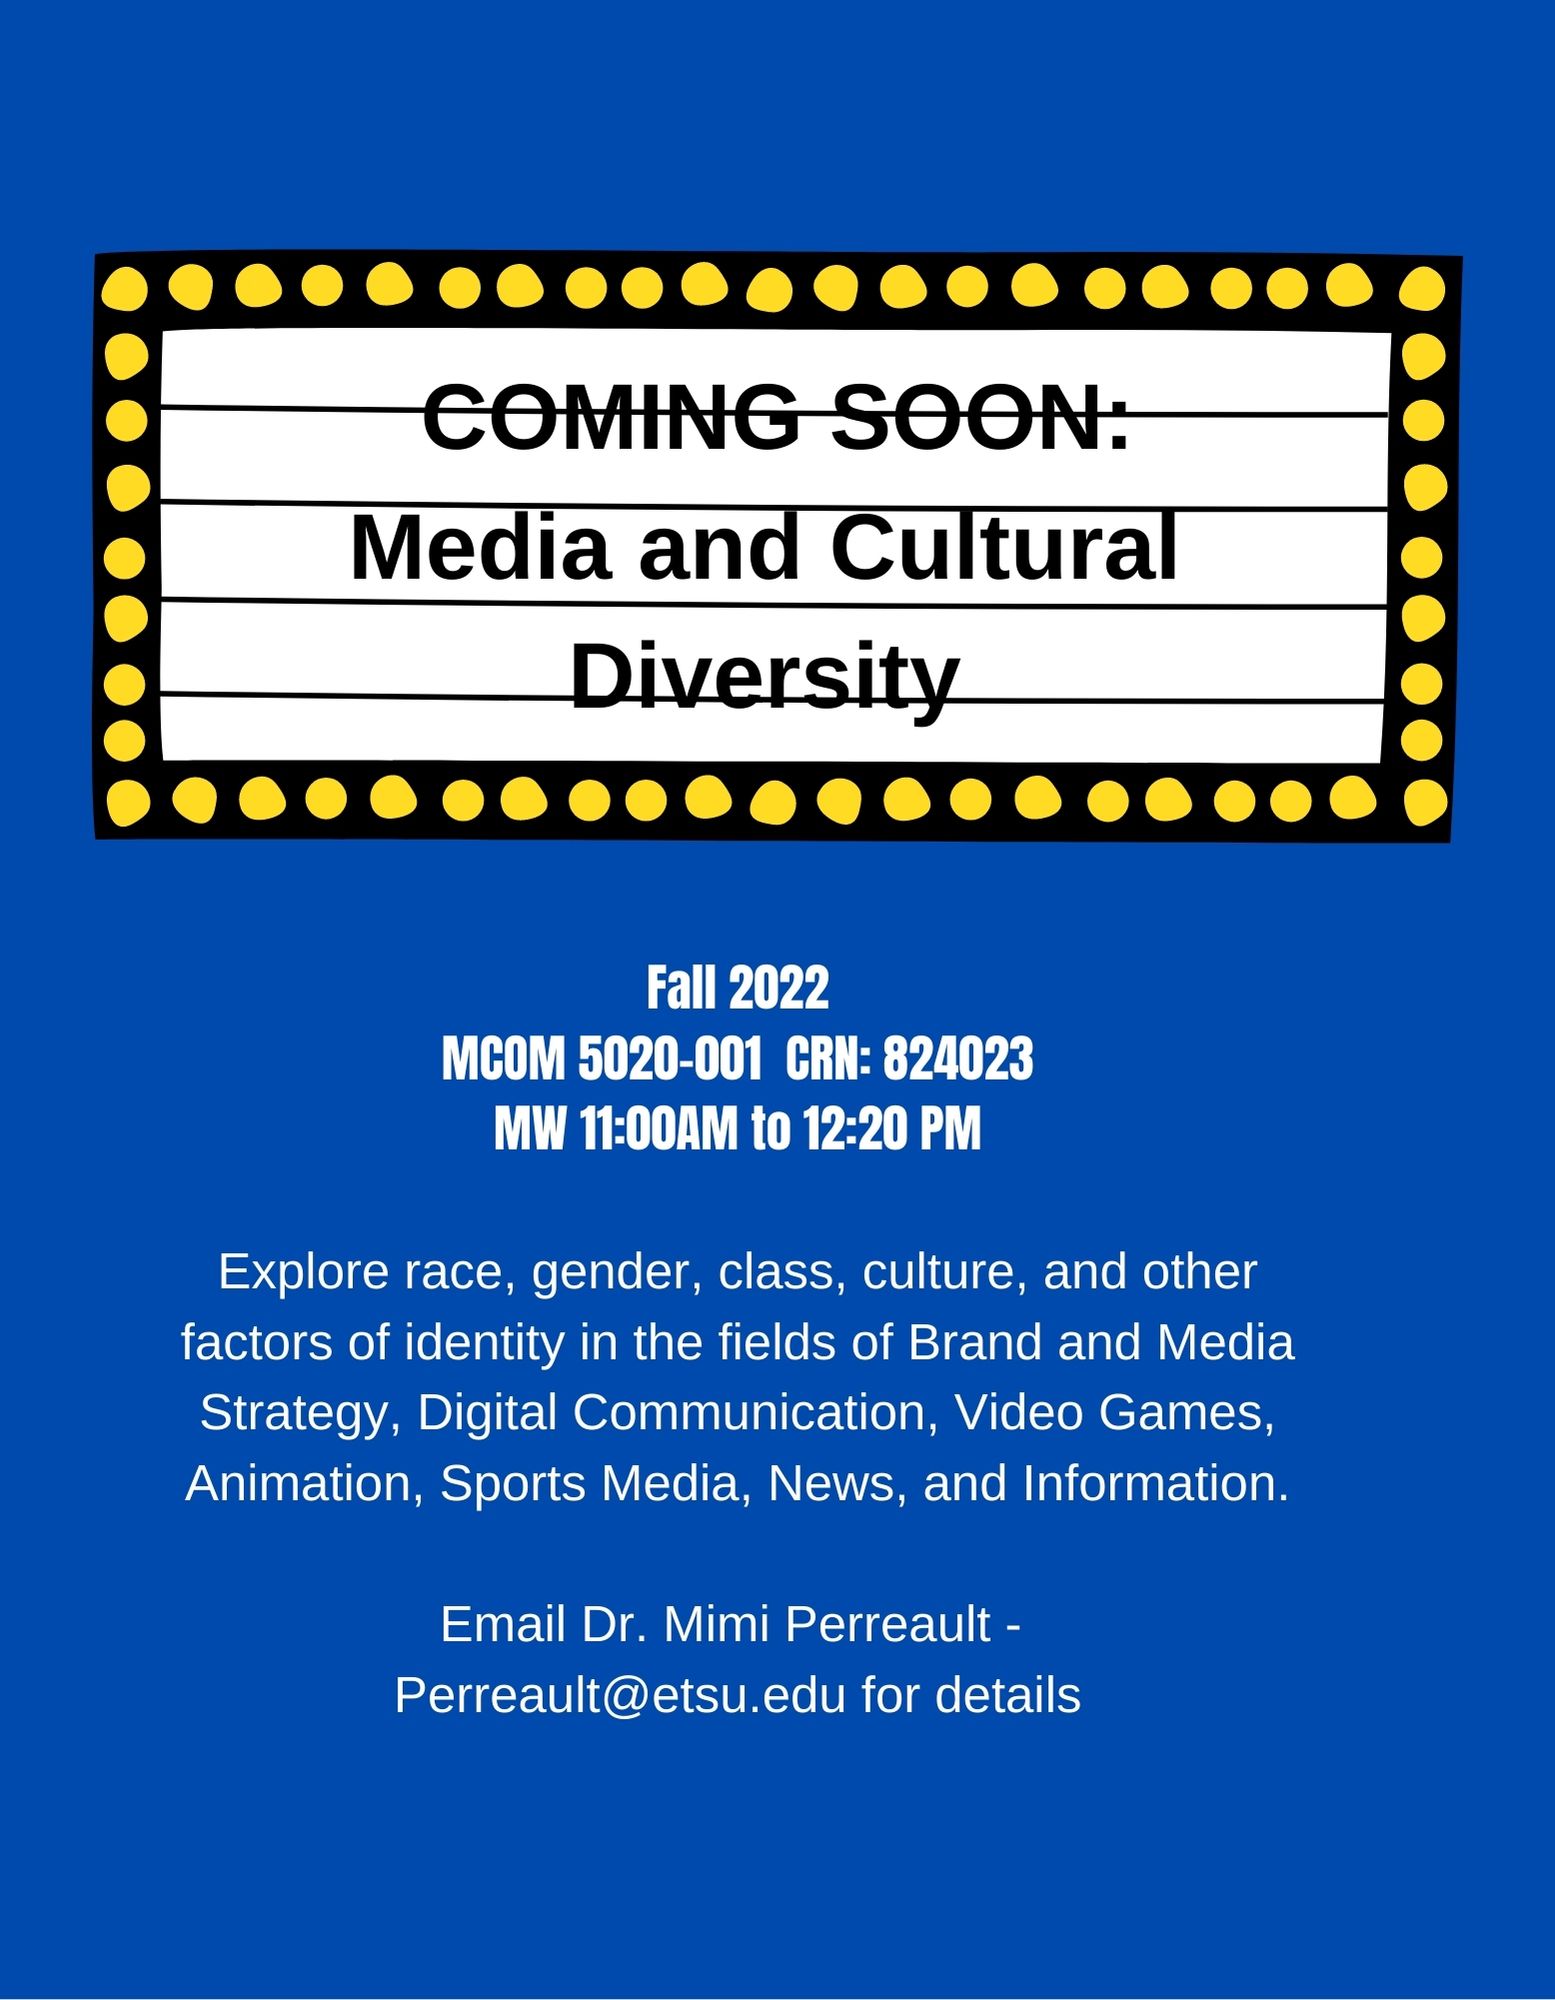 Media and Cultural Diversity class flyer with information detailed in the comments above